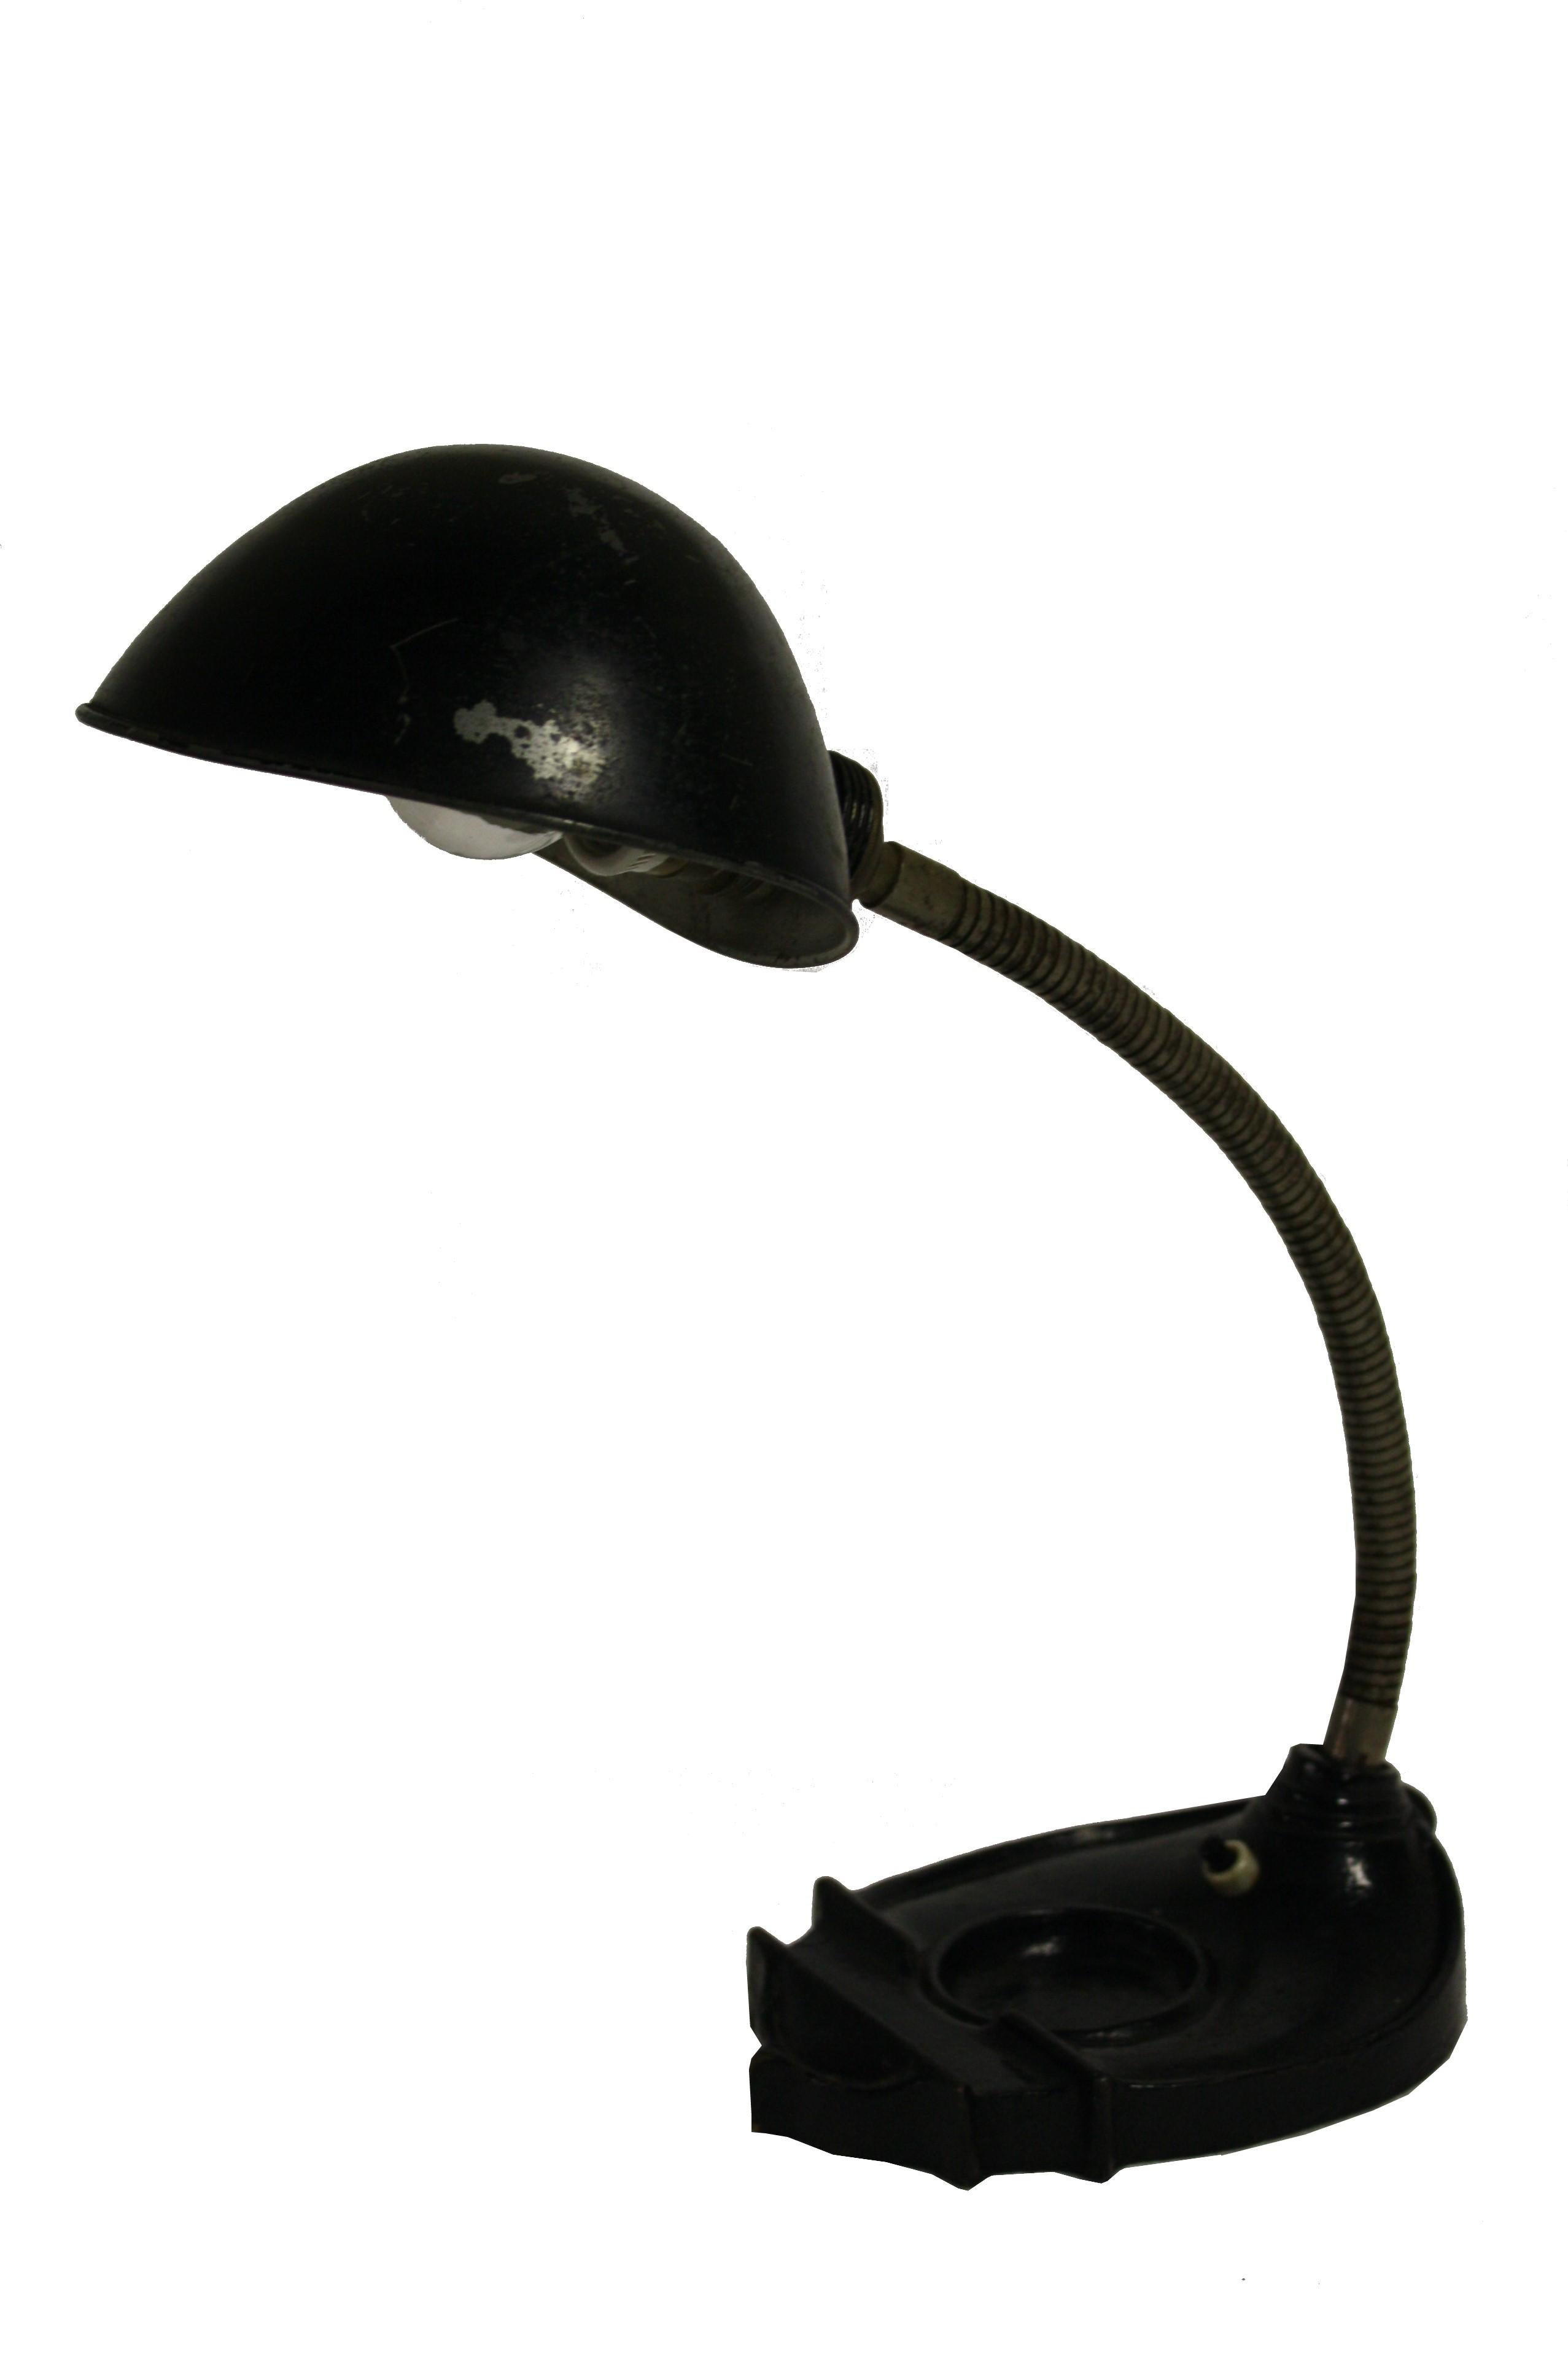 
Art deco era desk lamp with a cast iron base and a black metal shade.

Thanks to it's flexible arm, the lamp is adjustable.

This desk lamp has a typical art deco design with an unusal lamp shade and a base designed to hold a small inkwell and